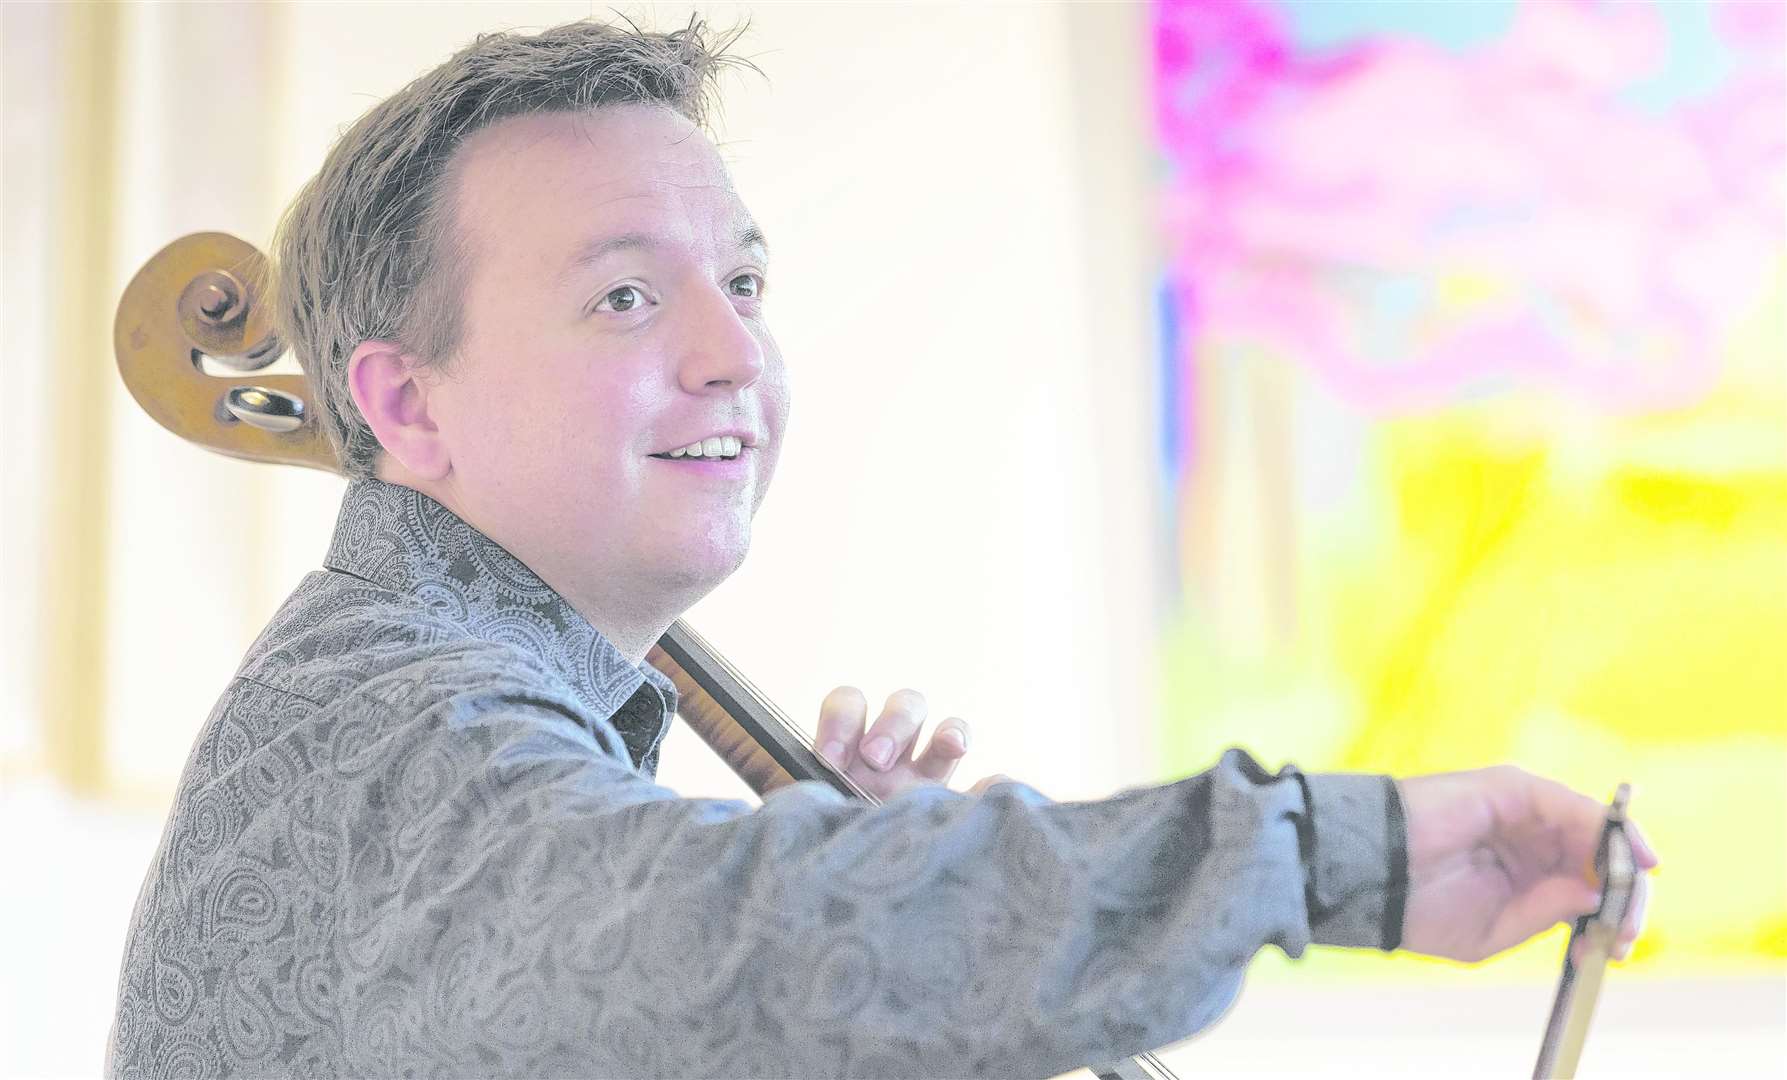 Cellist Richard Harwood will be at Music@Malling again this year